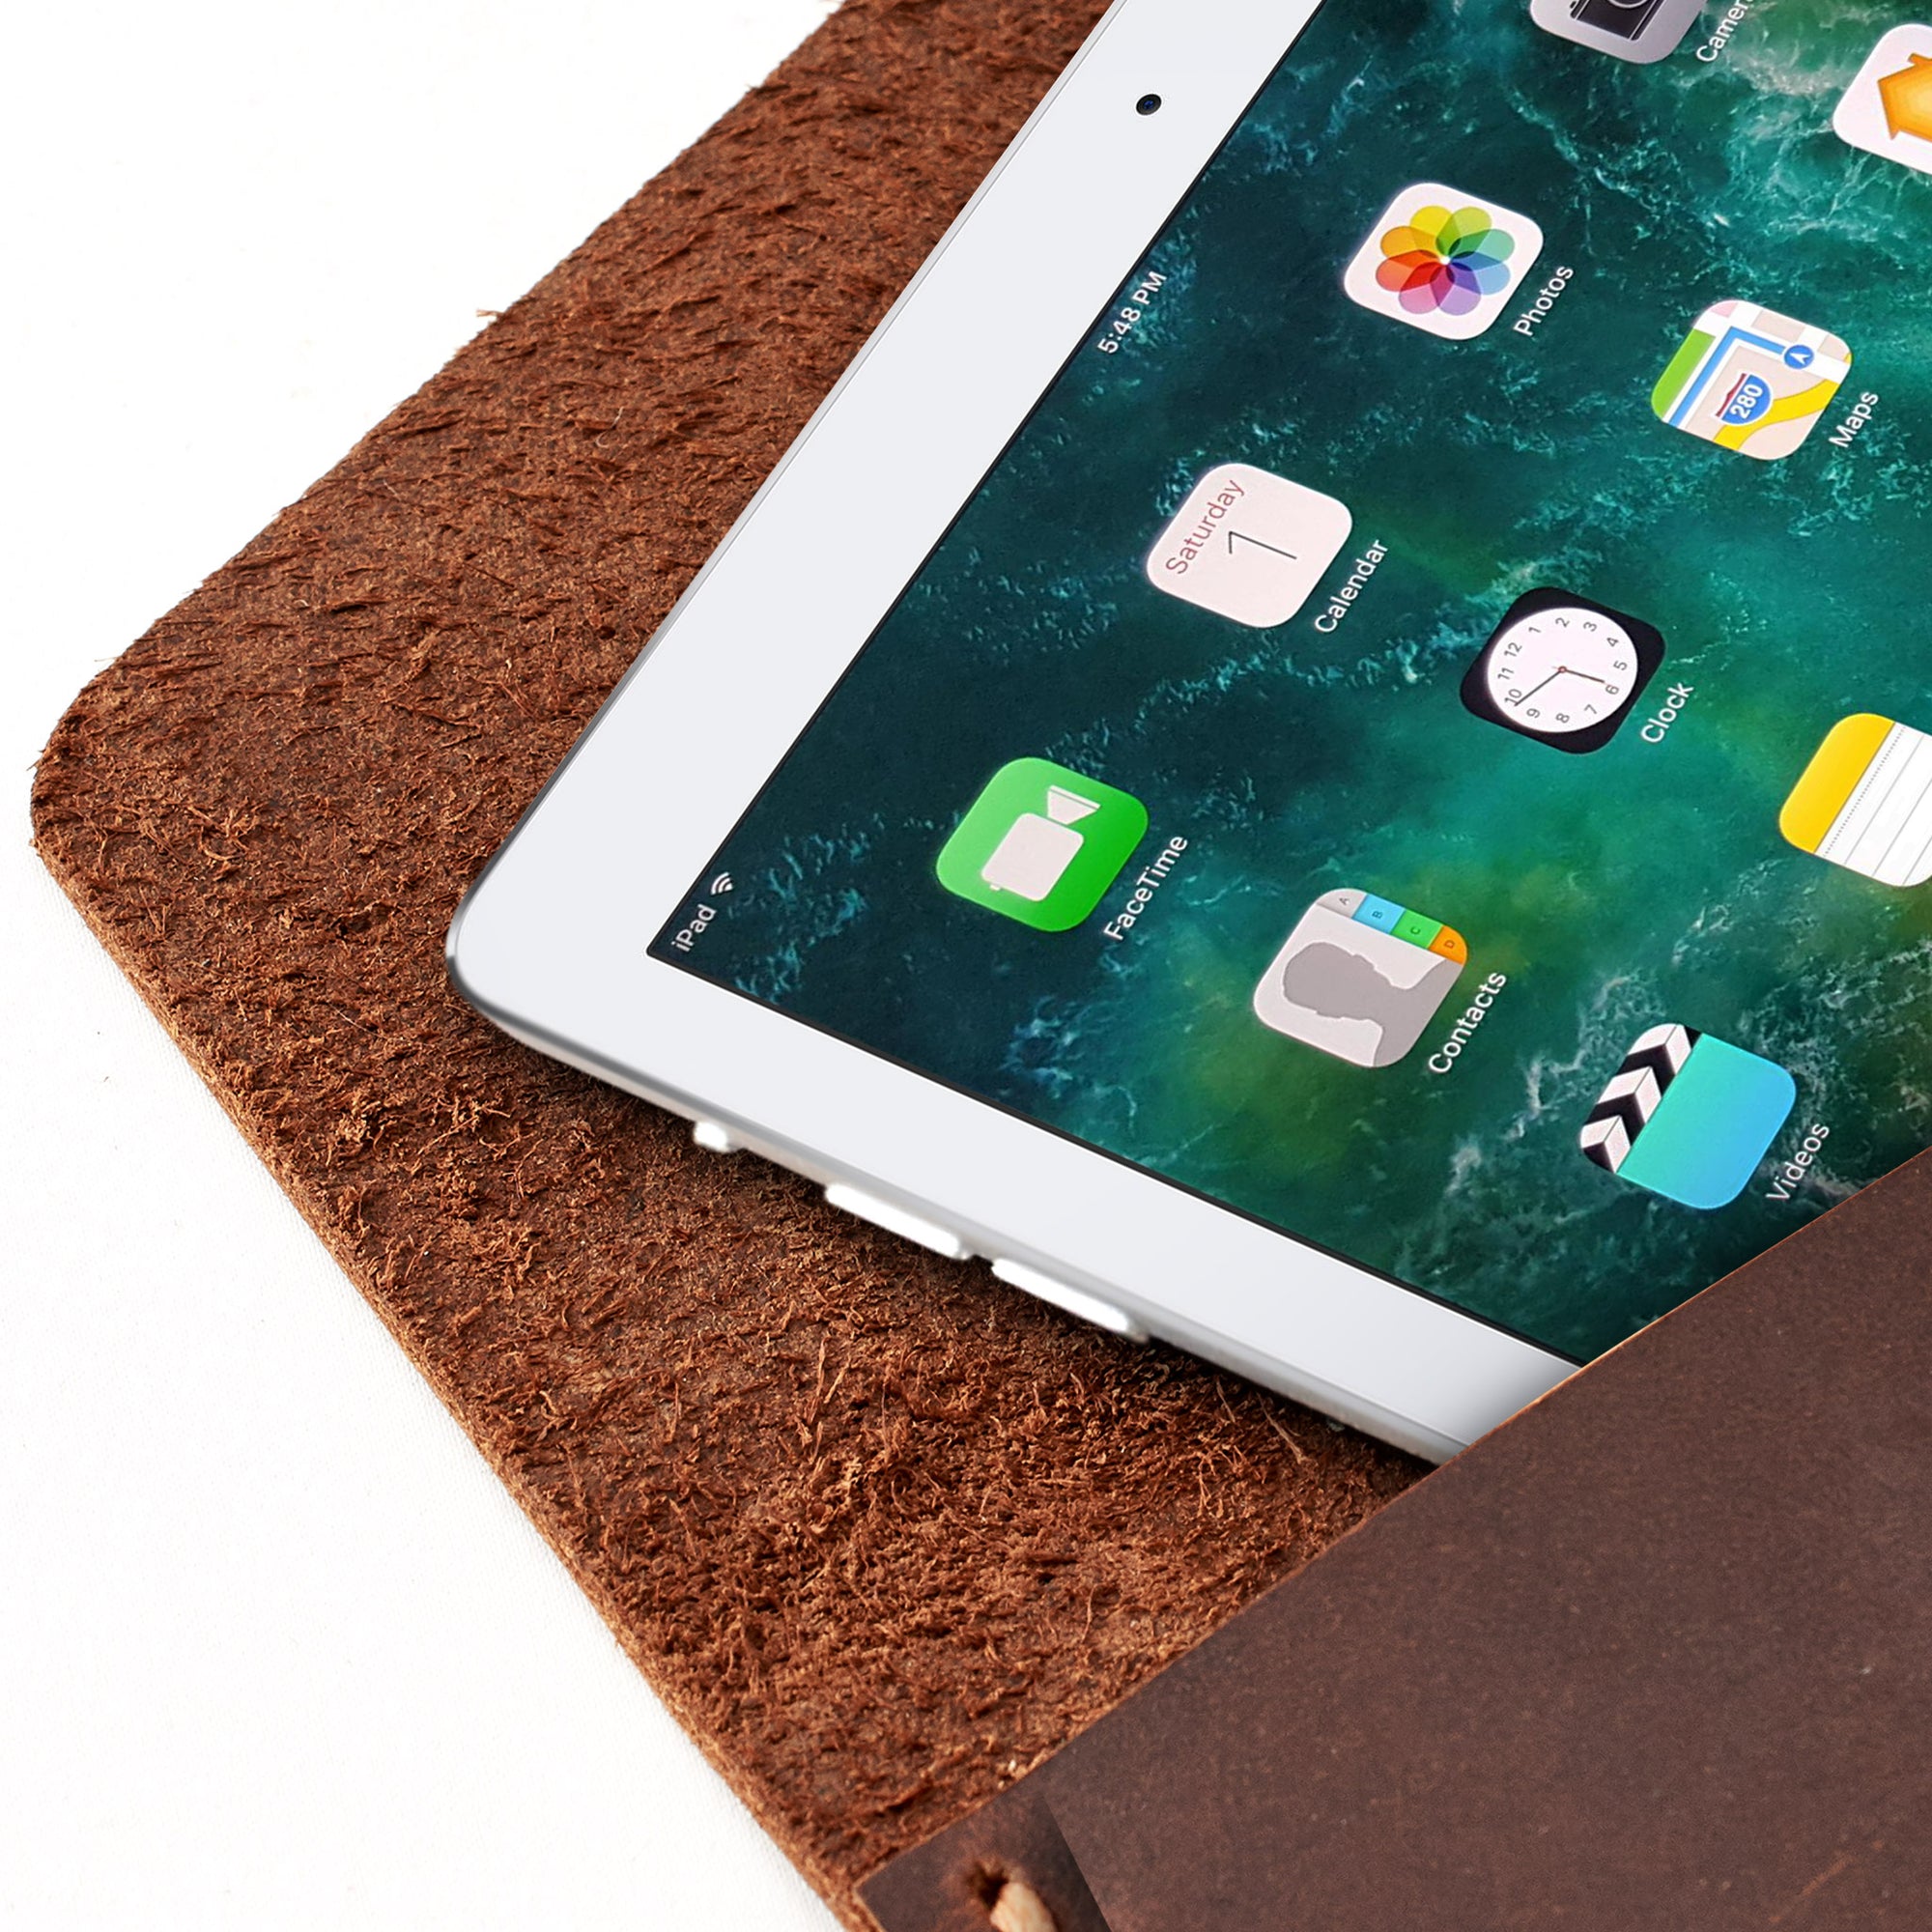 Anti screen scratch. Tan leather sleeve for iPad pro 10.5 inch 12.9 inch. Mens gifts